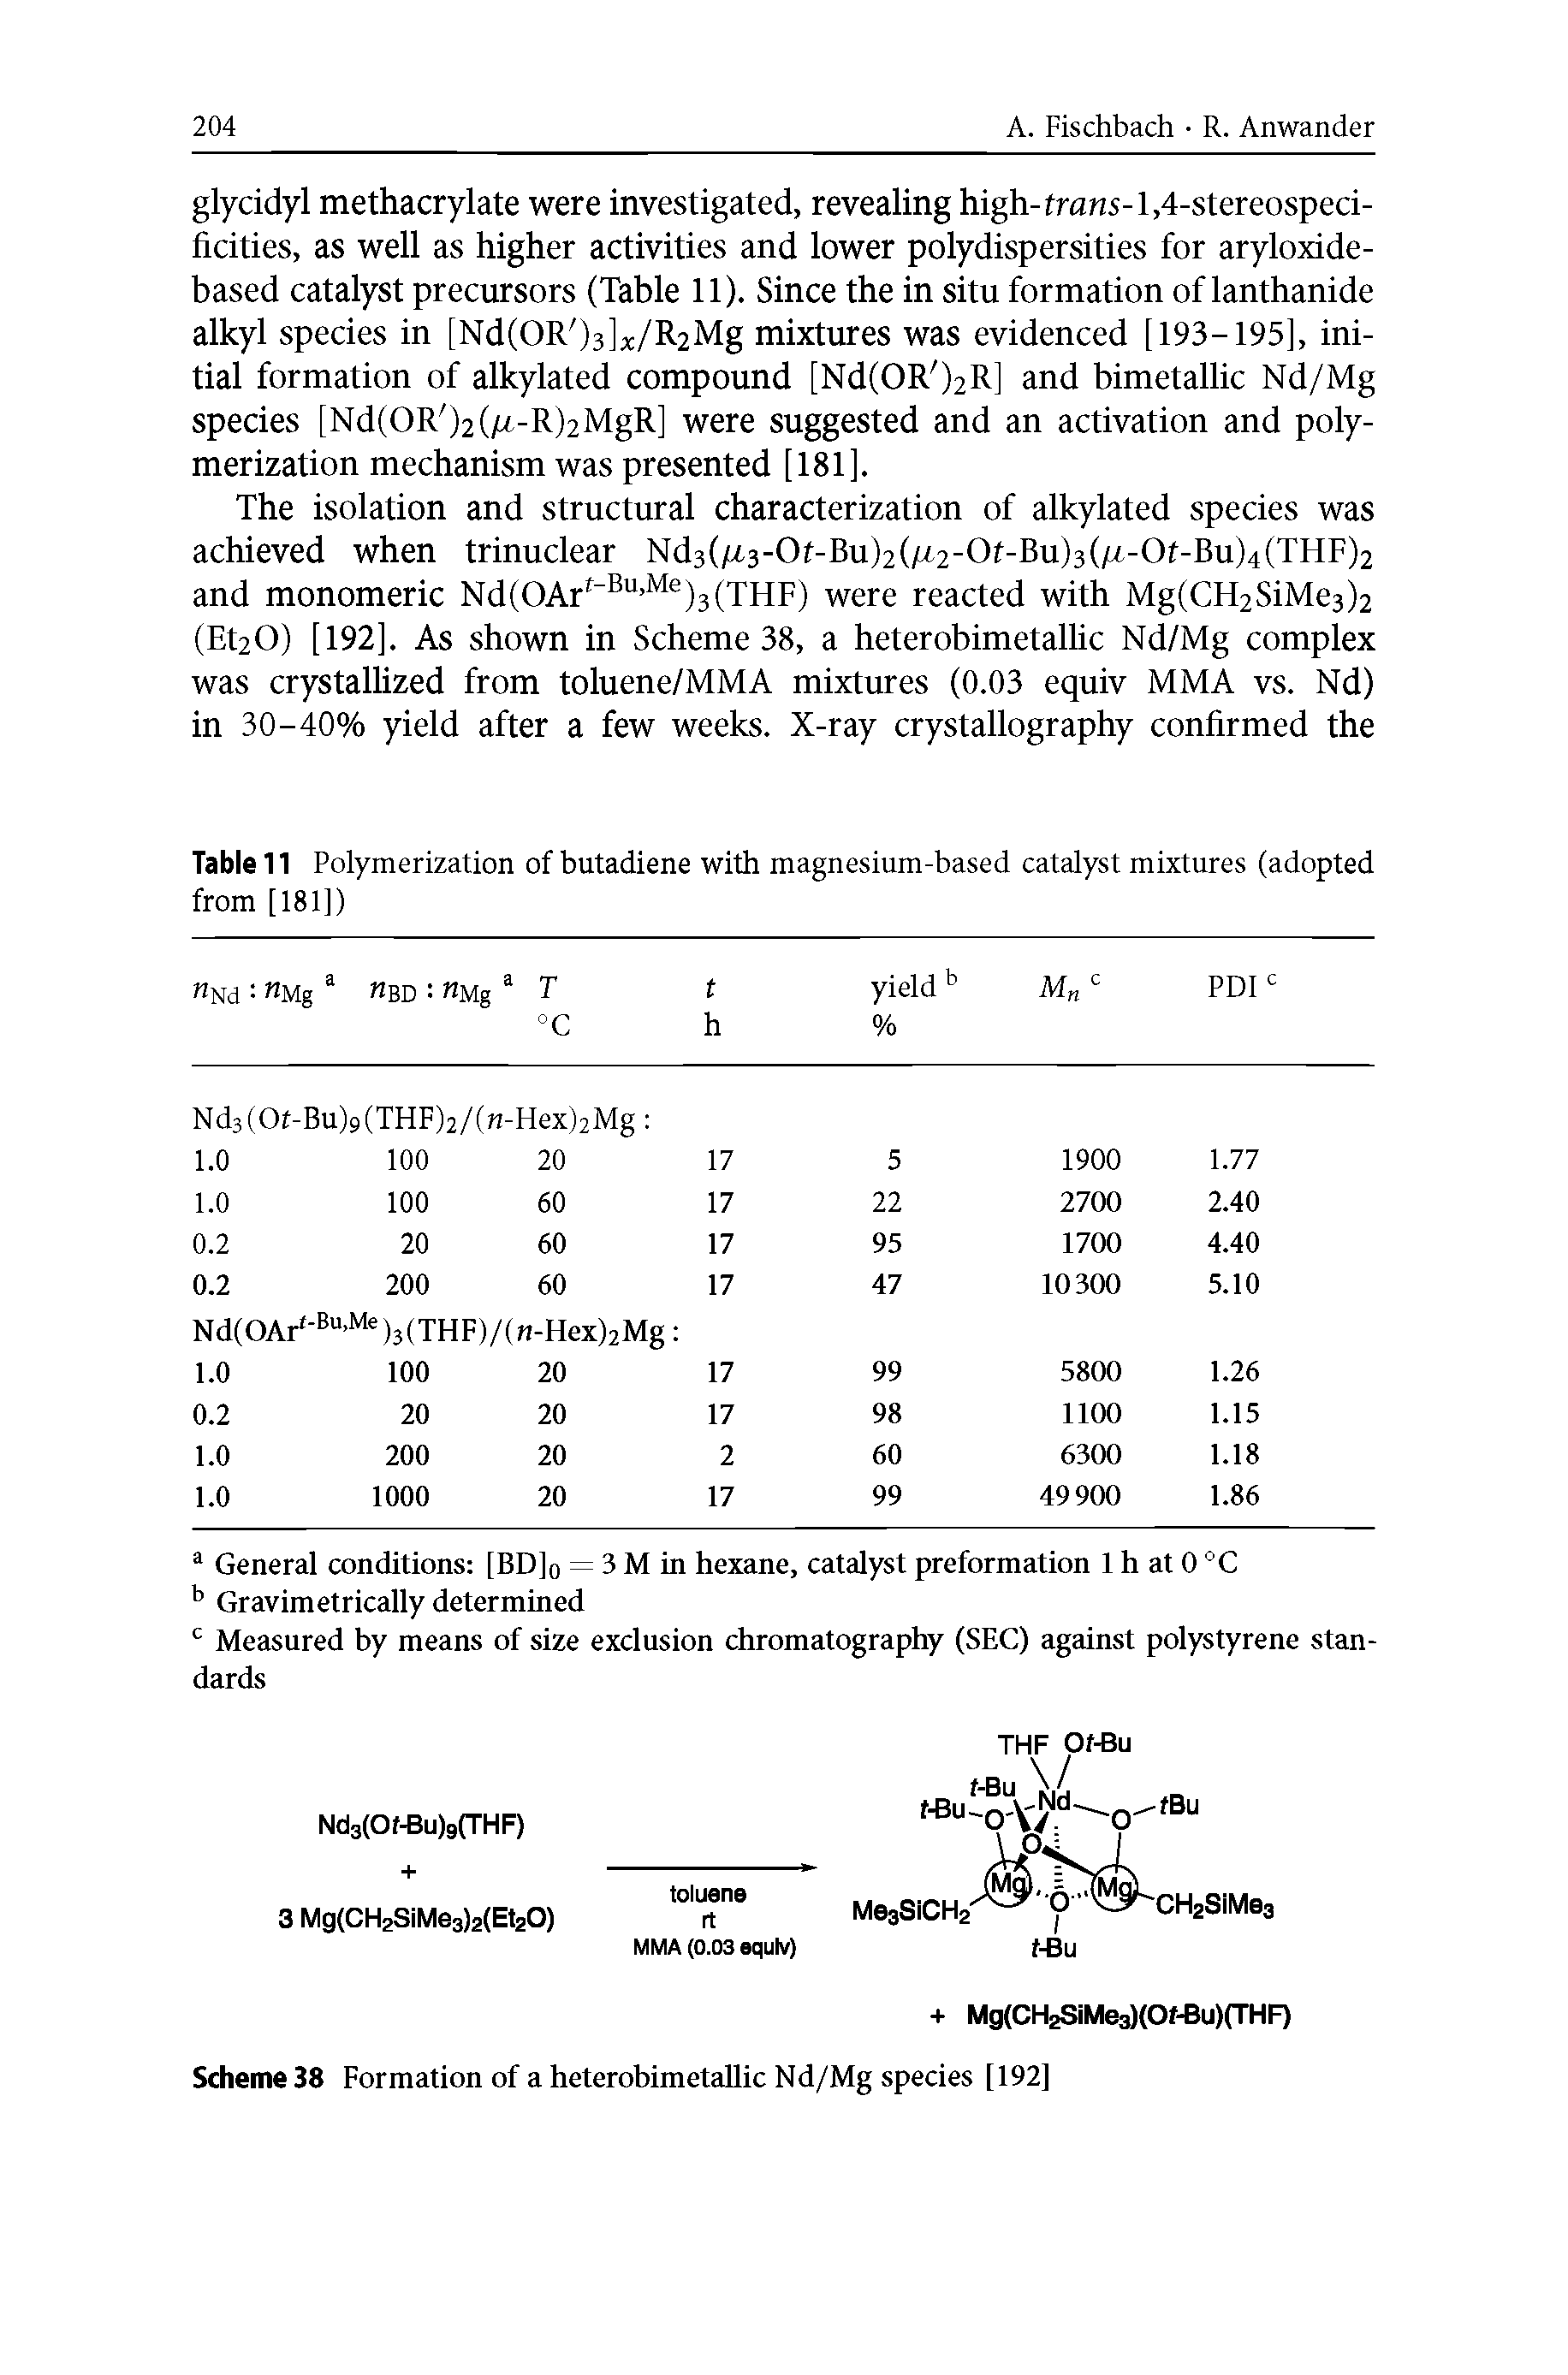 Table 11 Polymerization of butadiene with magnesium-based catalyst mixtures (adopted from [181])...